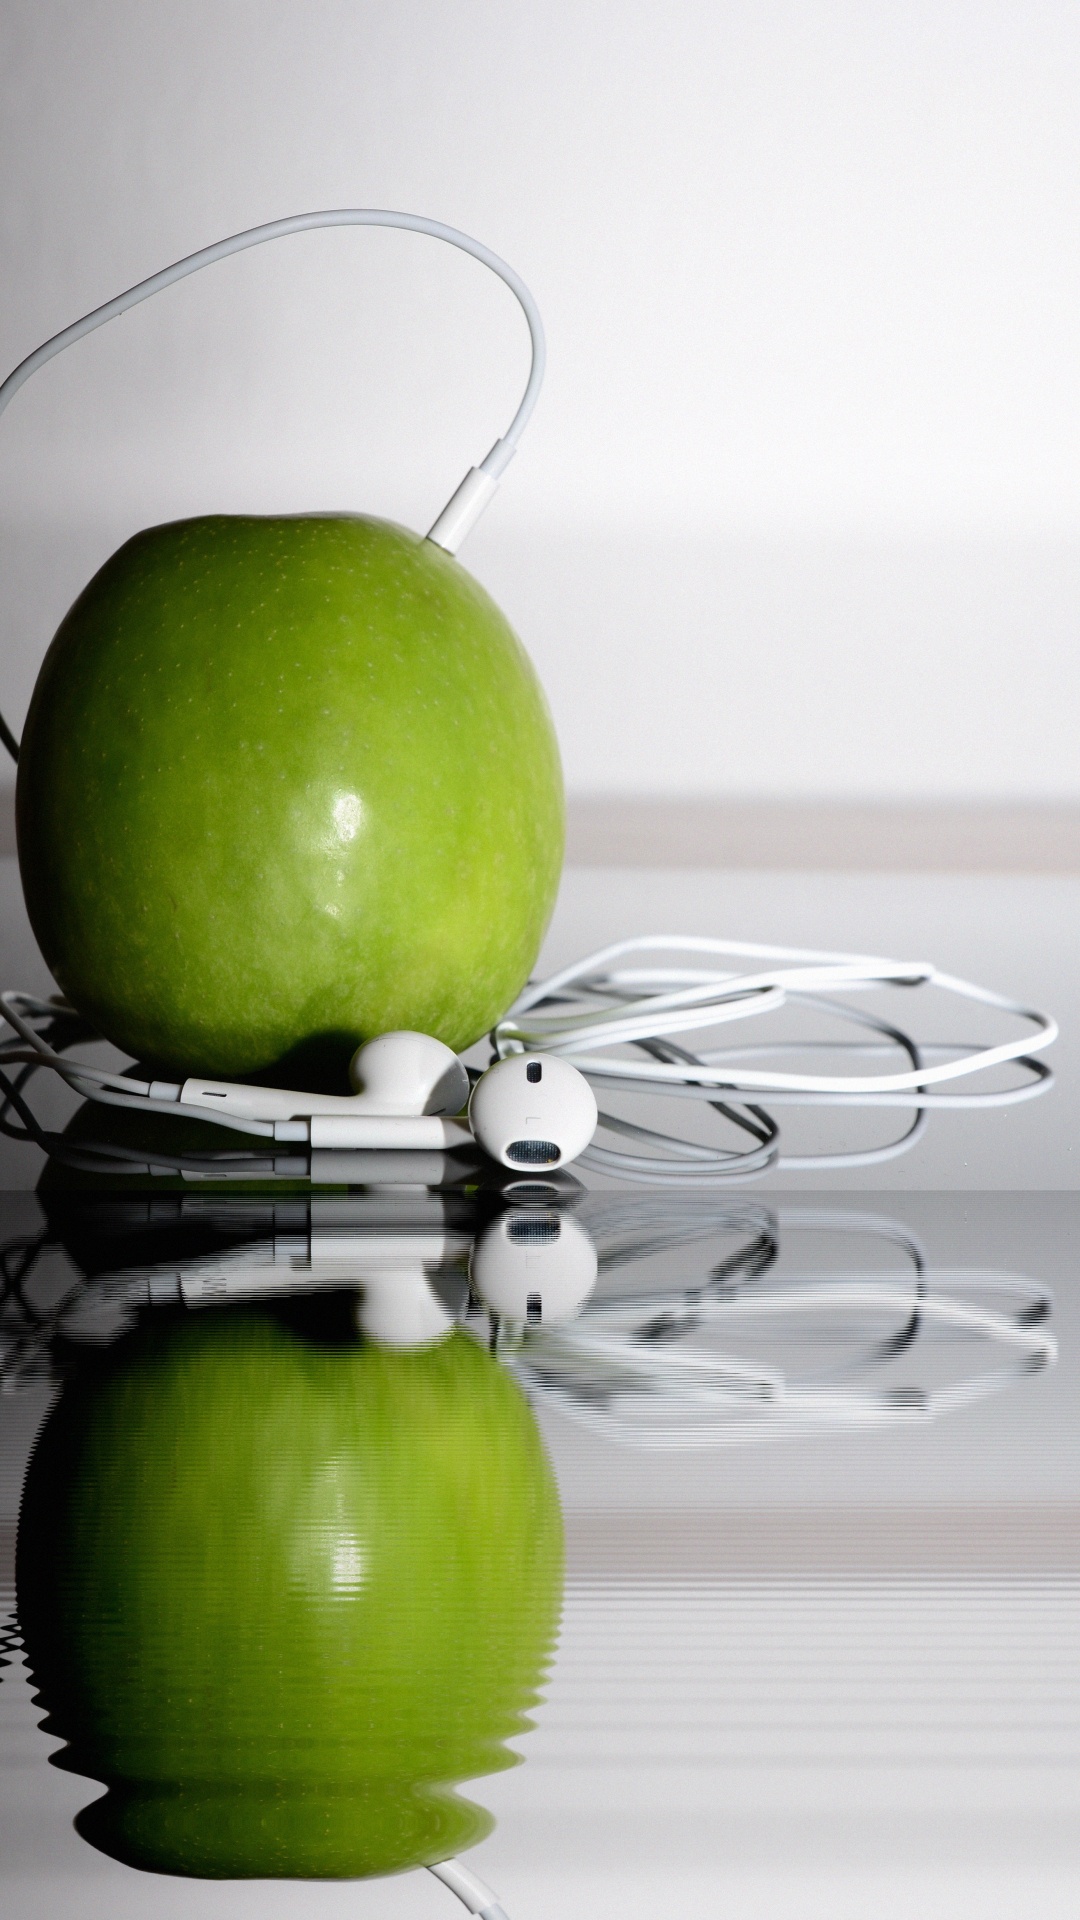 Apple Auriculares, Auriculares, Verde, Granny Smith, Apple. Wallpaper in 1080x1920 Resolution